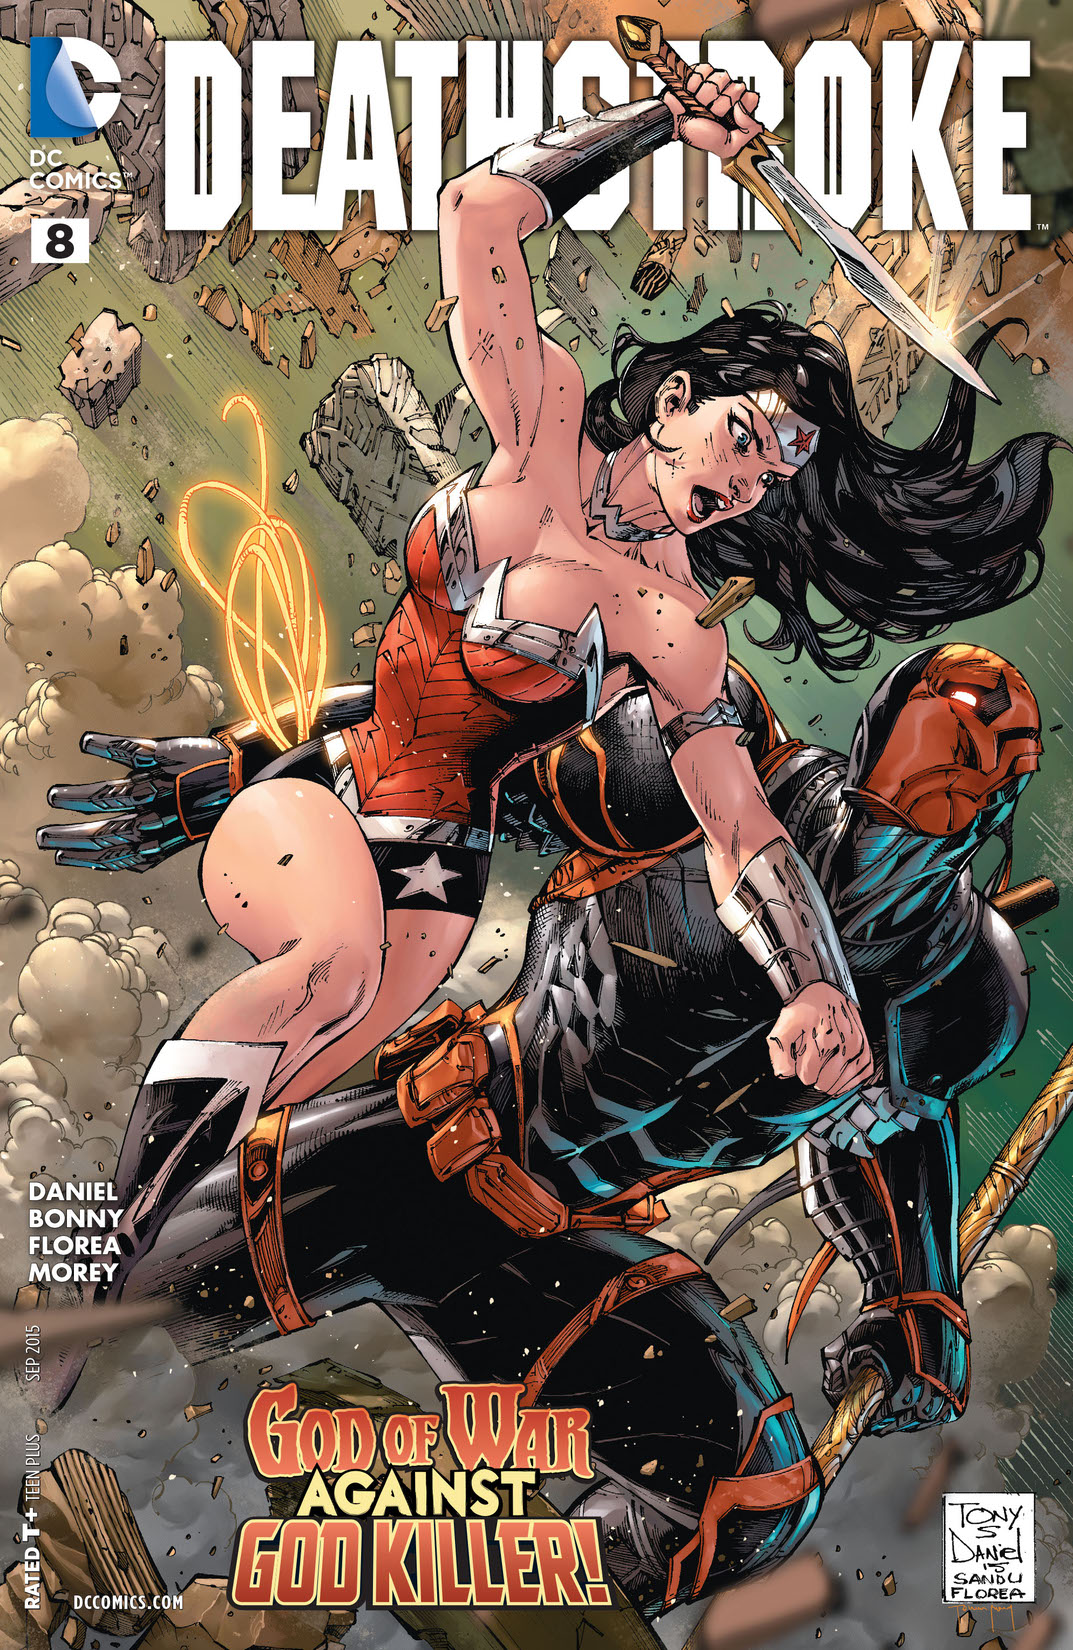 Deathstroke (2014-) #8 preview images